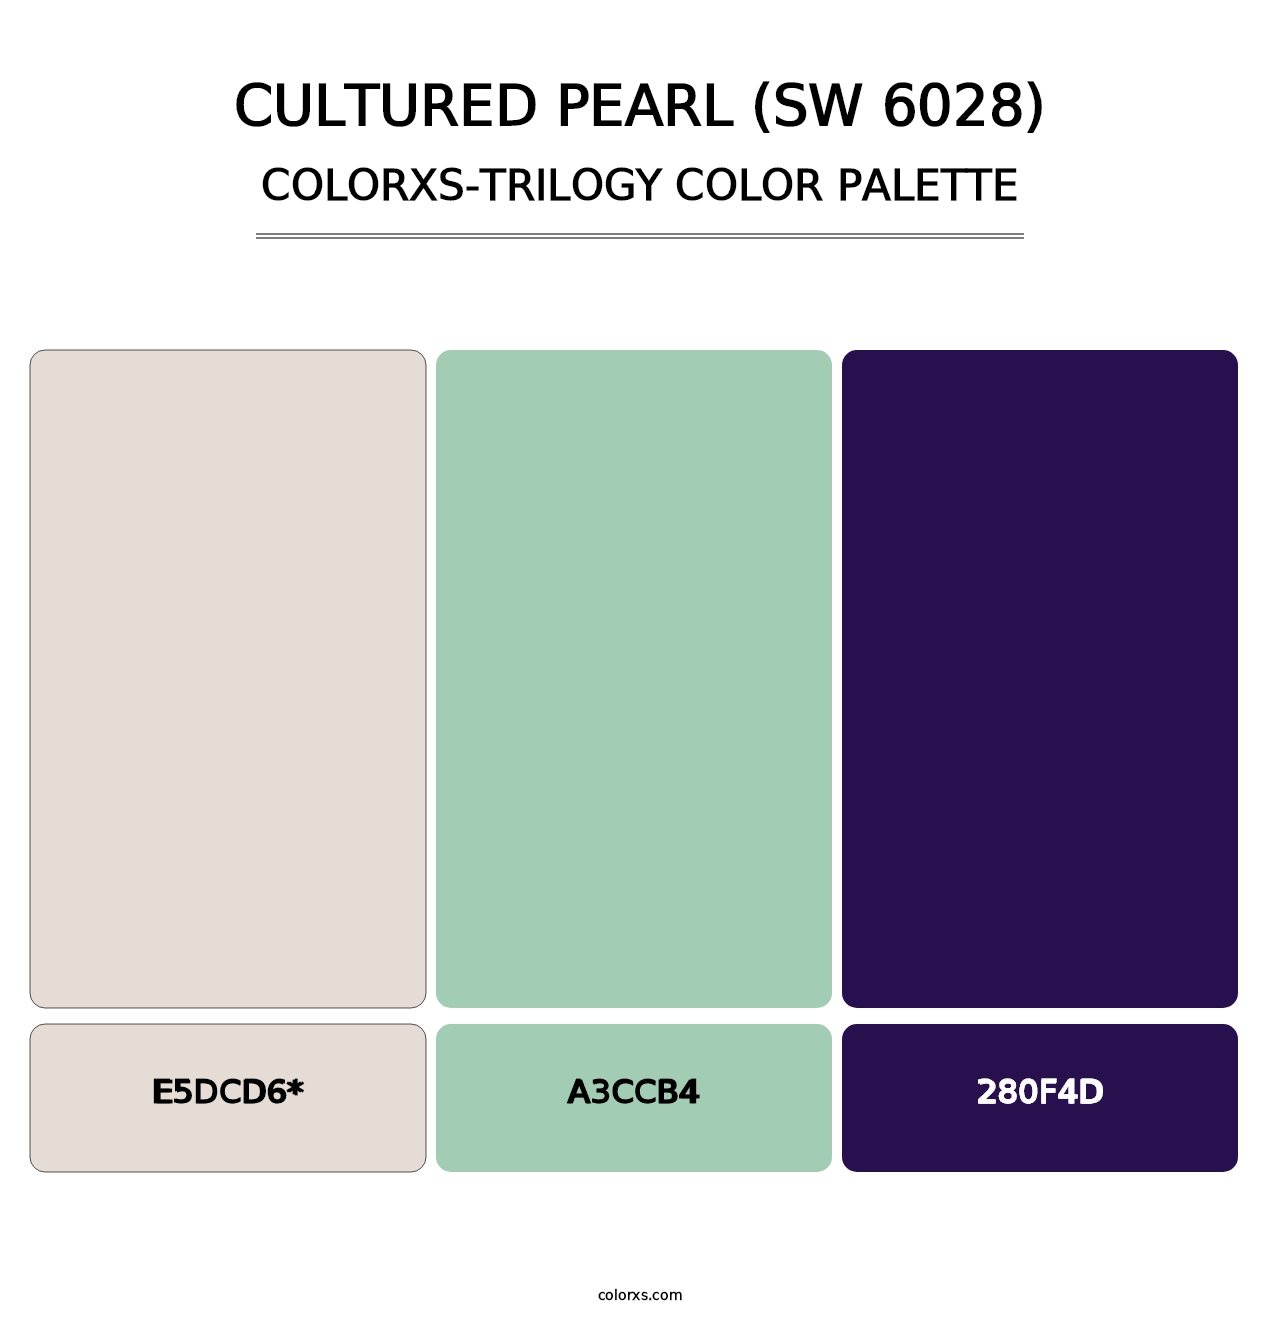 Cultured Pearl (SW 6028) - Colorxs Trilogy Palette